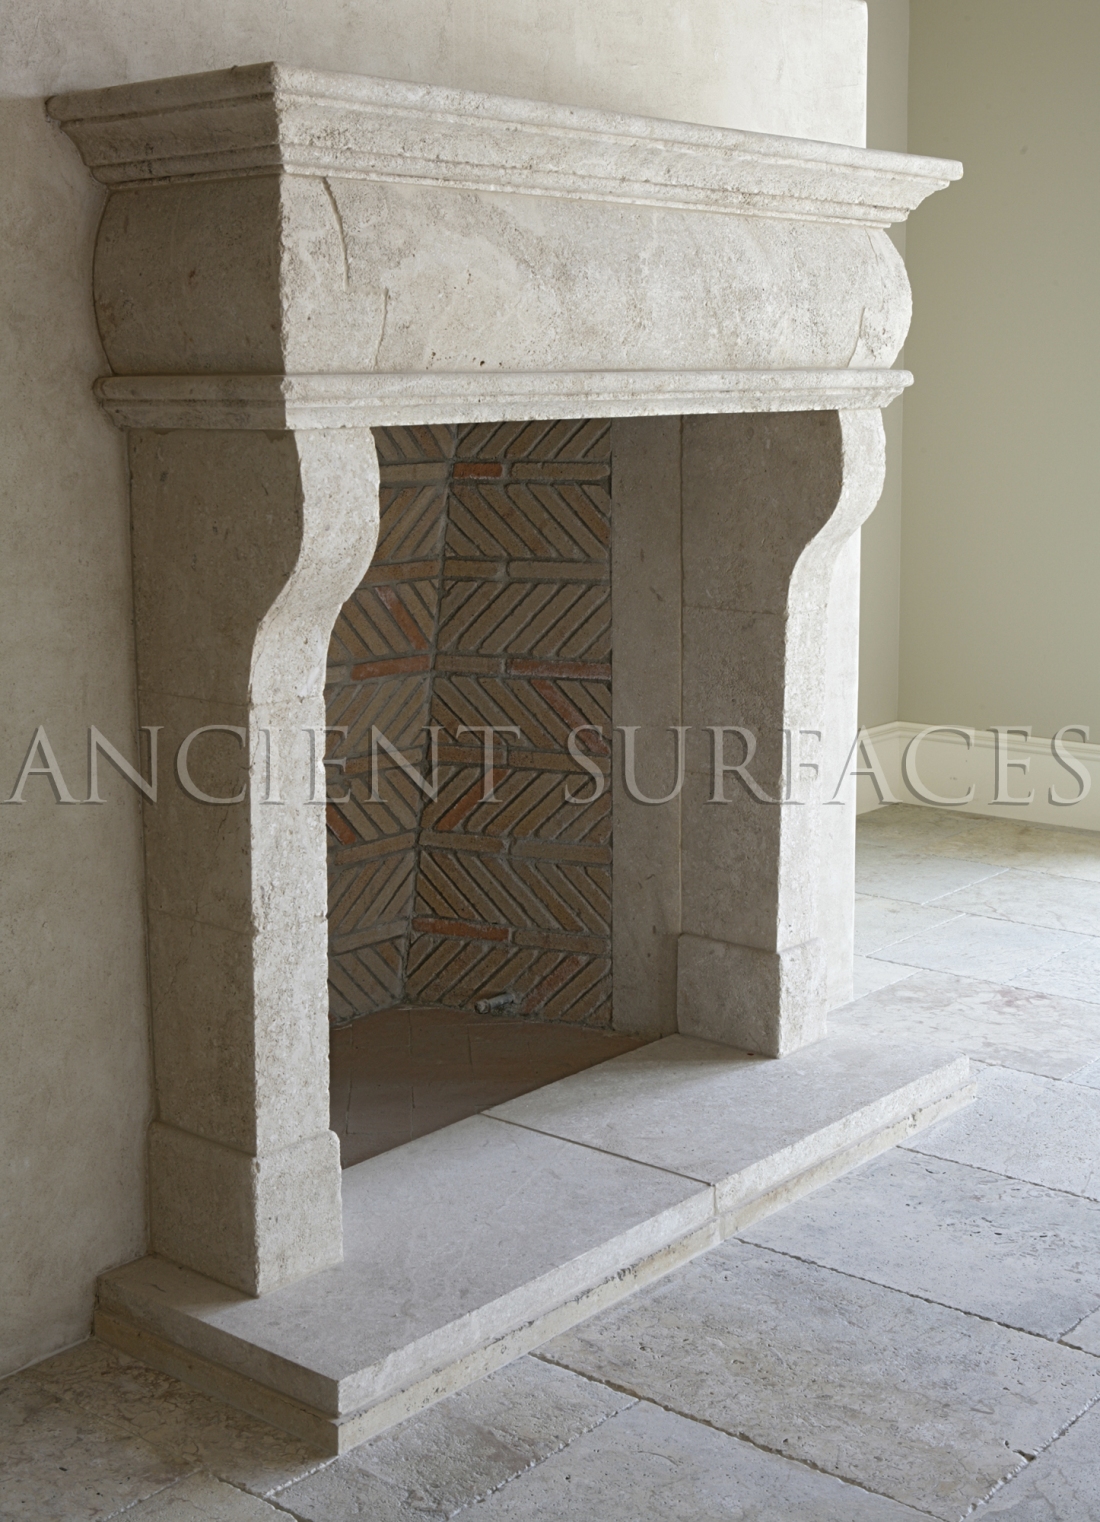 This Italian countryside fireplace was hand carved out of hard limestone installed with an interesting herringbone firebox and running bond brick lines.